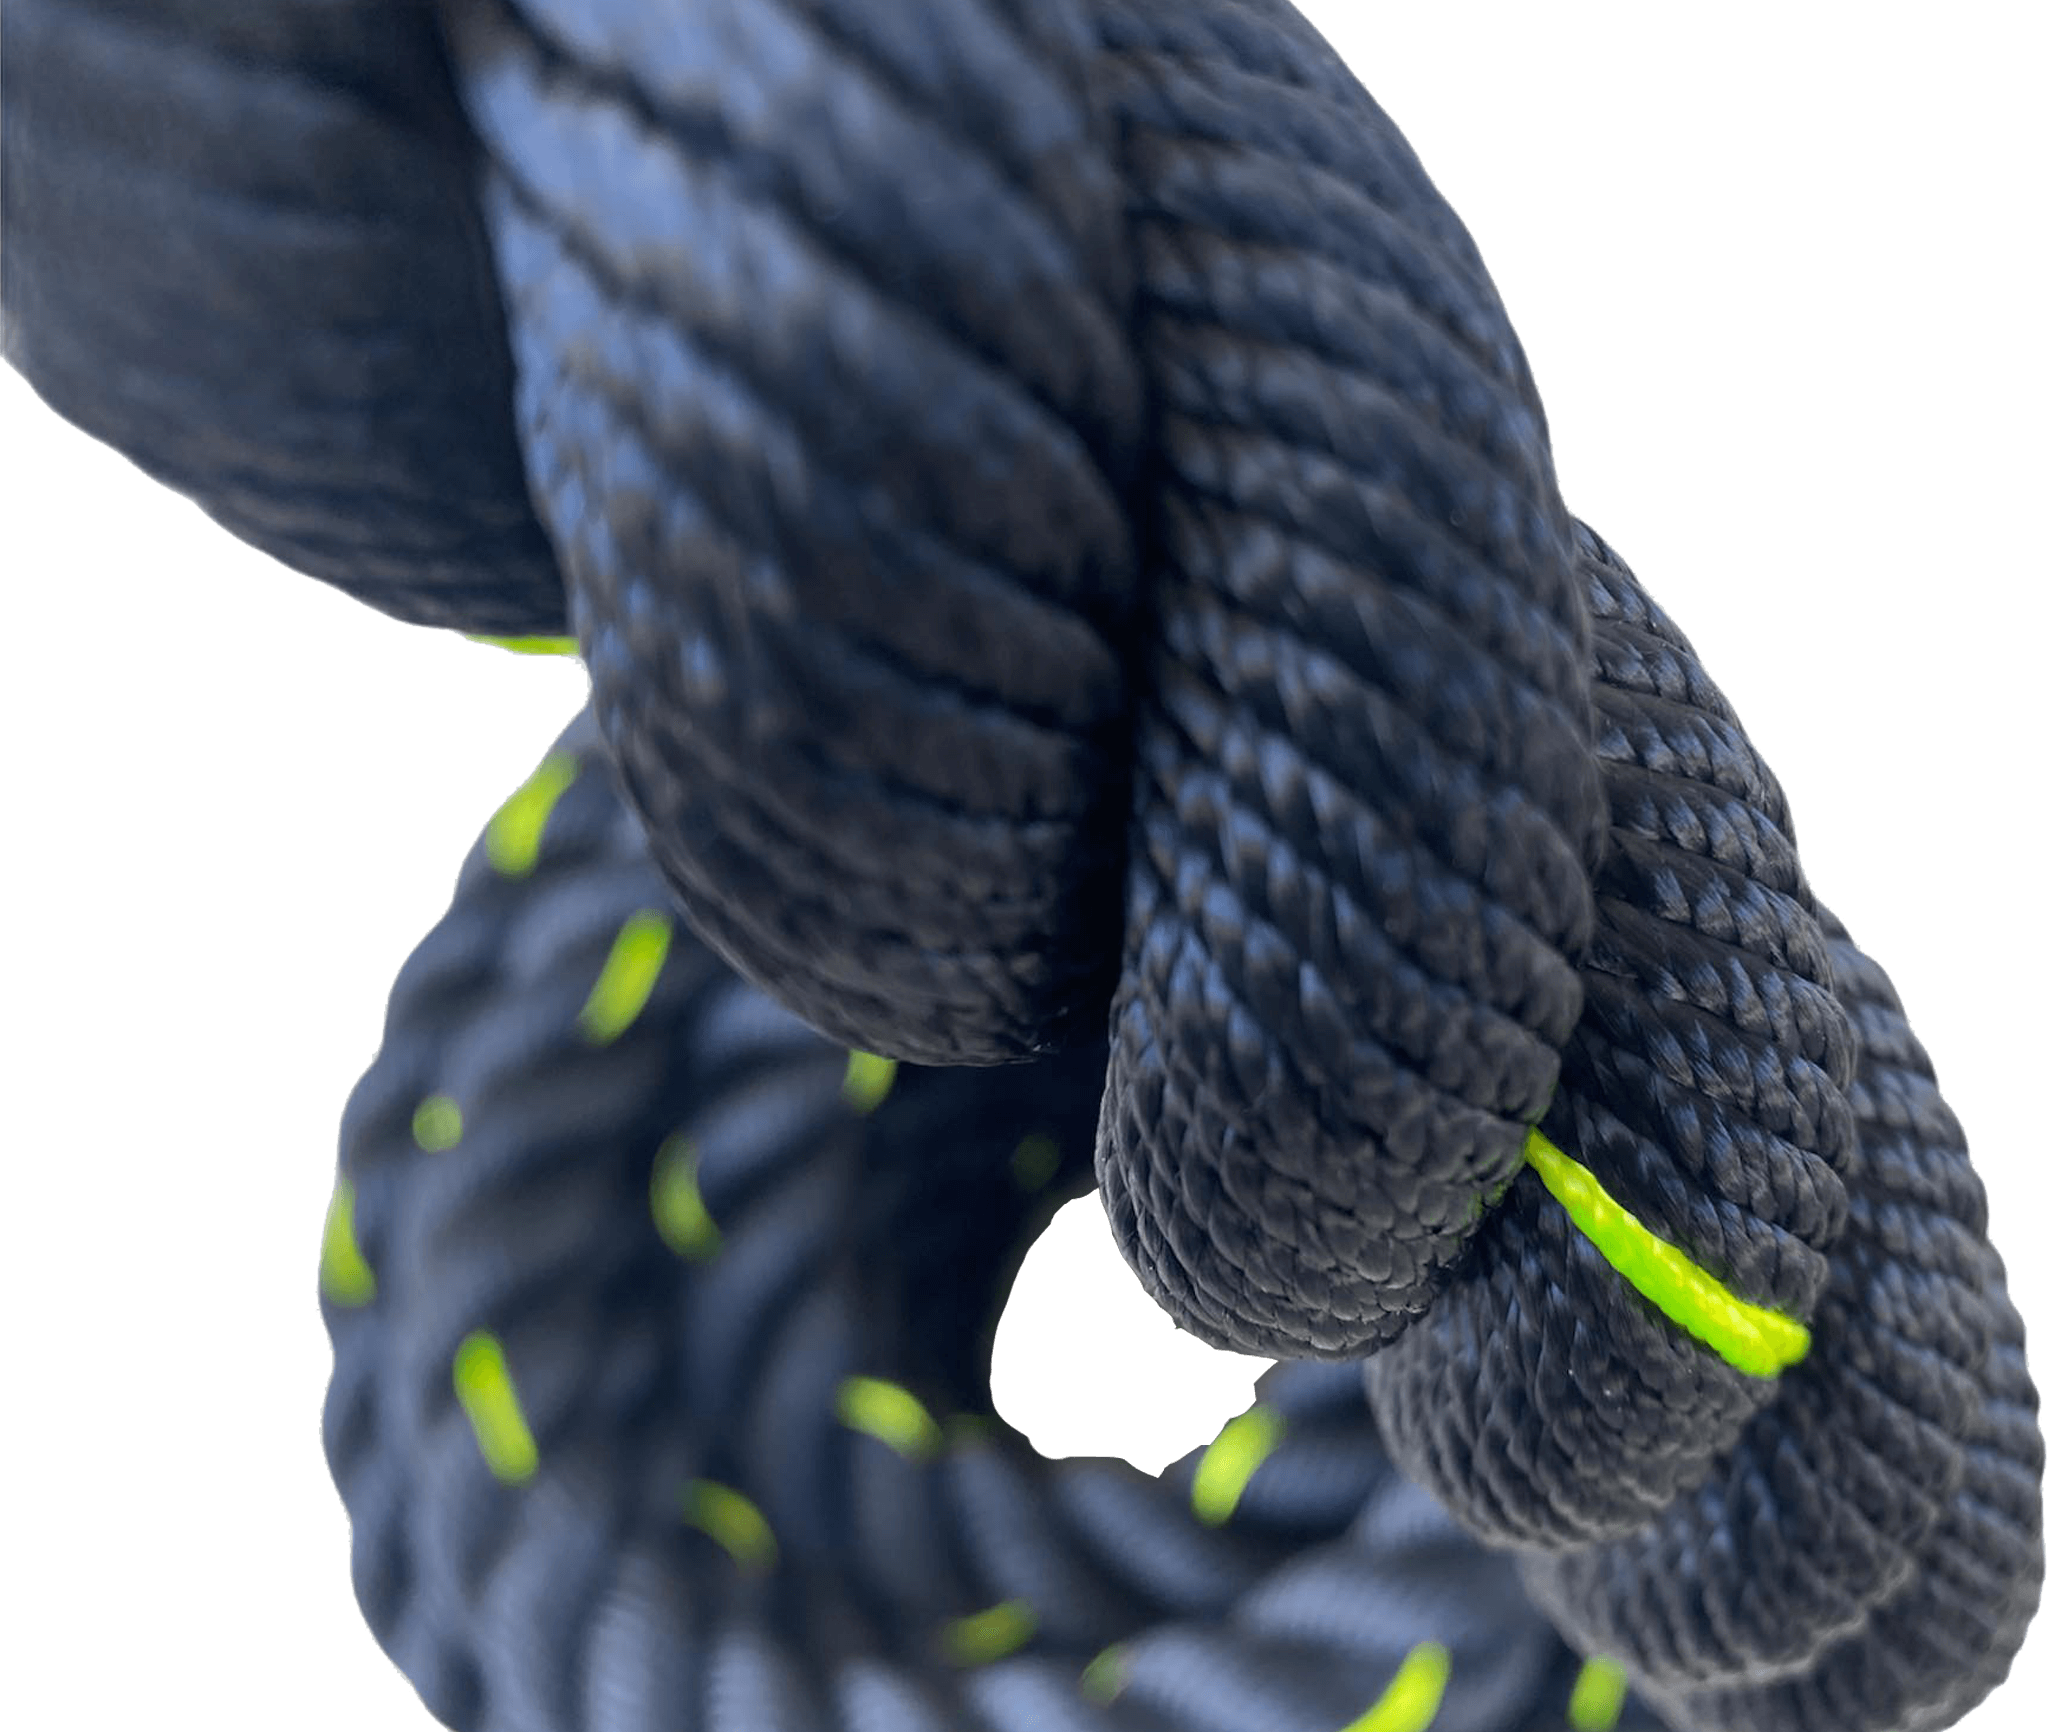 12m 38mm Battle Ropes Nylon Thick Heavy Duty Exercise Training Rope | INSOURCE